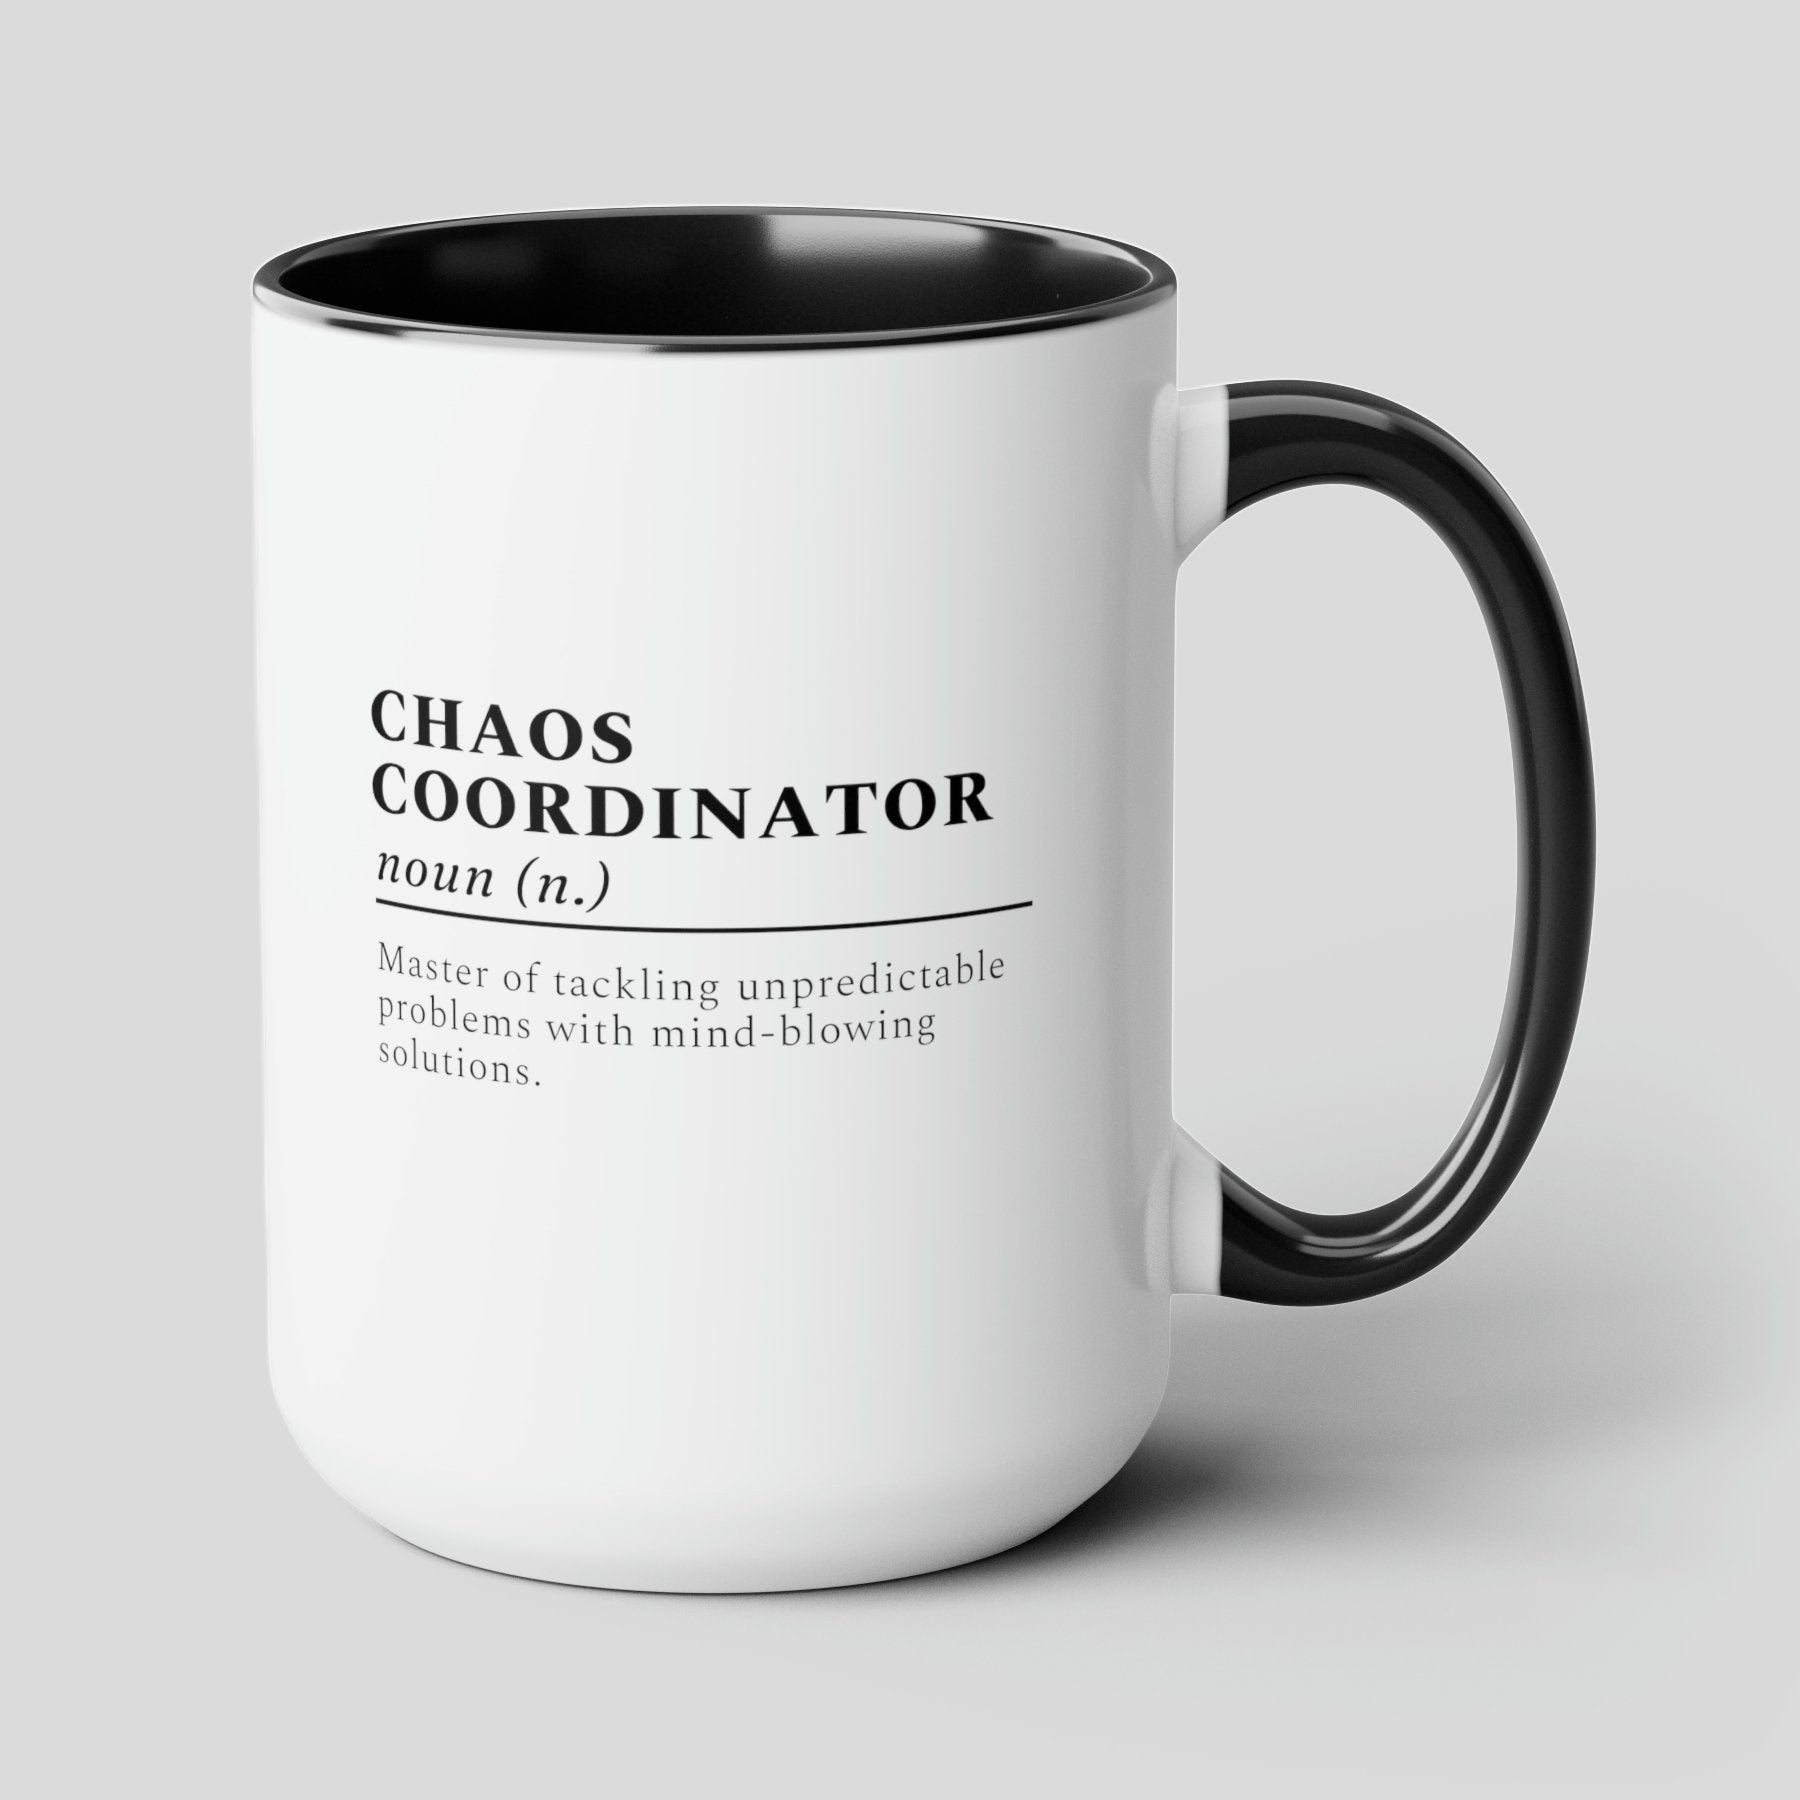 Chaos Coordinator Definition 15oz white with black accent funny large coffee mug gift for boss office manager appreciation christmas secret santa idea waveywares wavey wares wavywares wavy wares cover